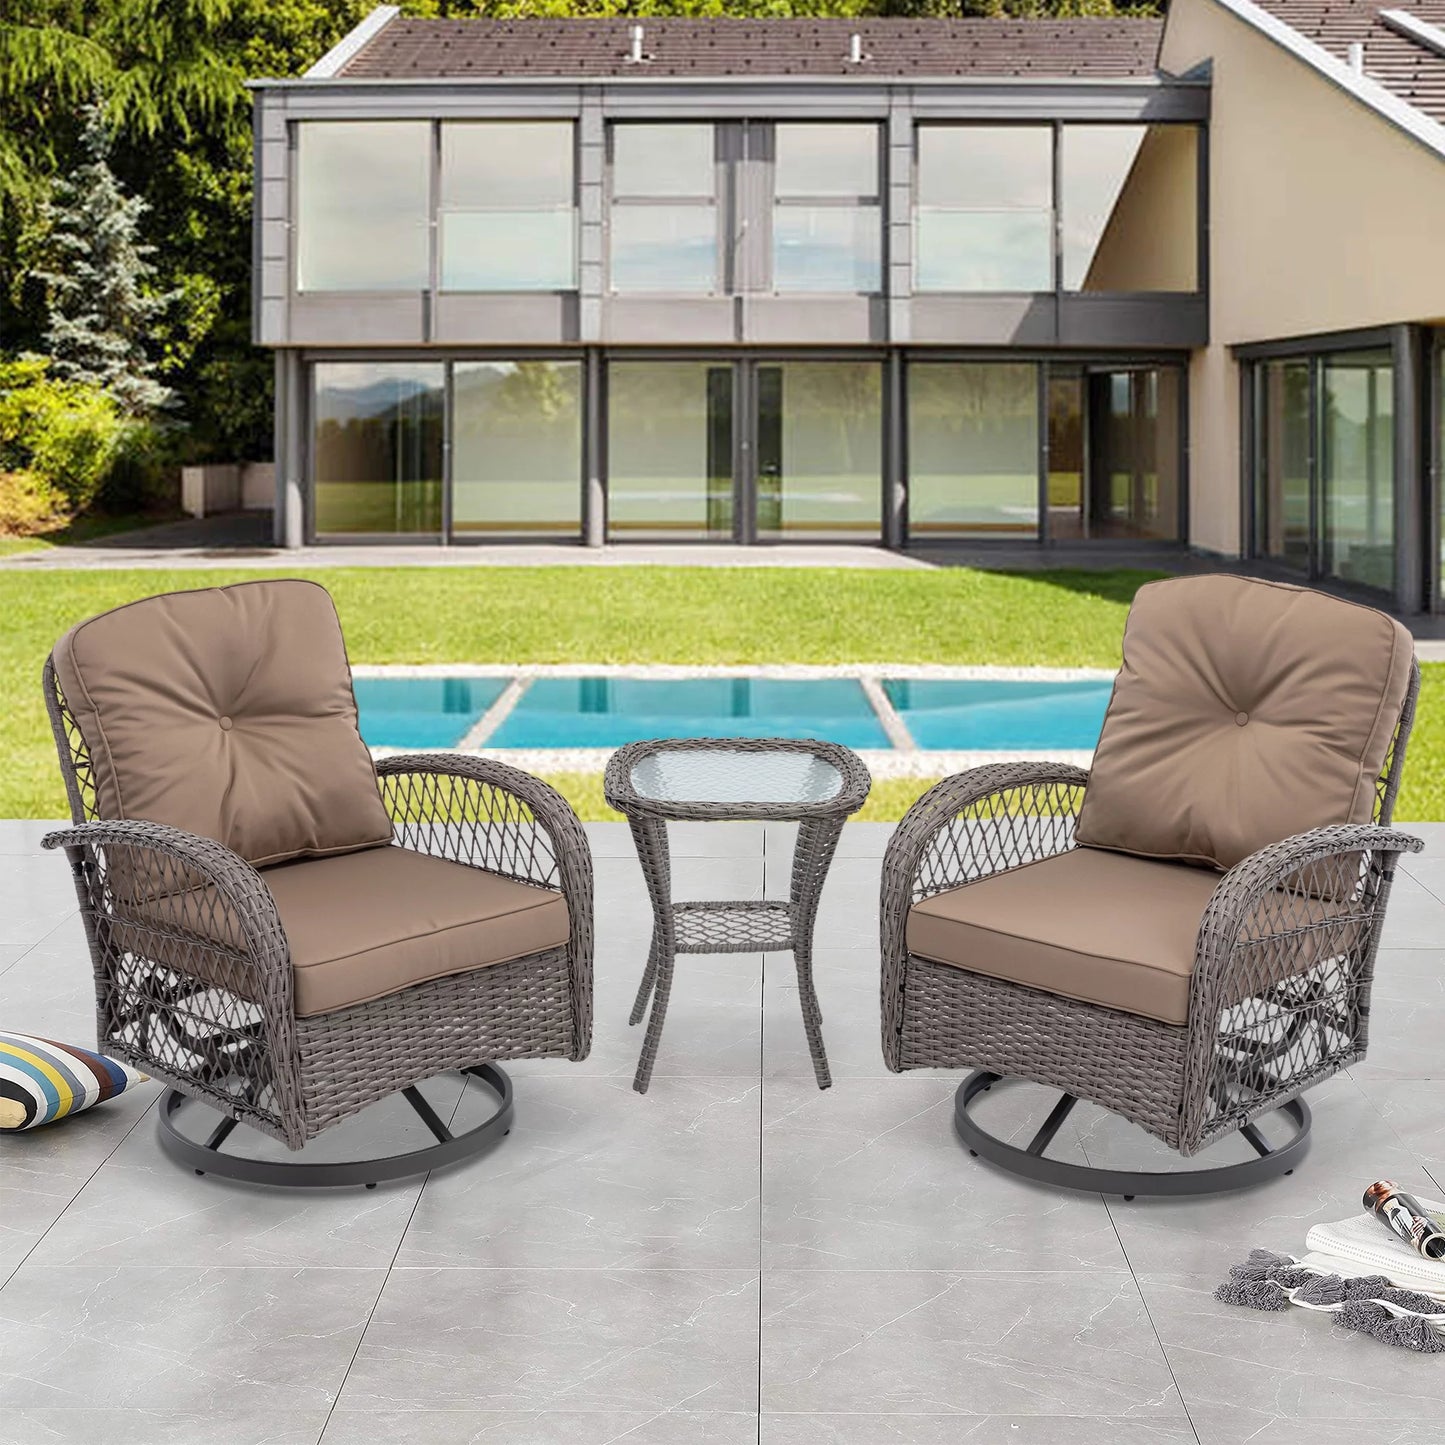 3 Piece Outdoor Rocking Bistro Set, PE Rattan Glass Top Table and Rocking Chairs Set, Outdoor Conversation Set with Cushions for 2 Persons, All-weather Bistro Set for Patio, Pool, Balcony, Pub, Cafe